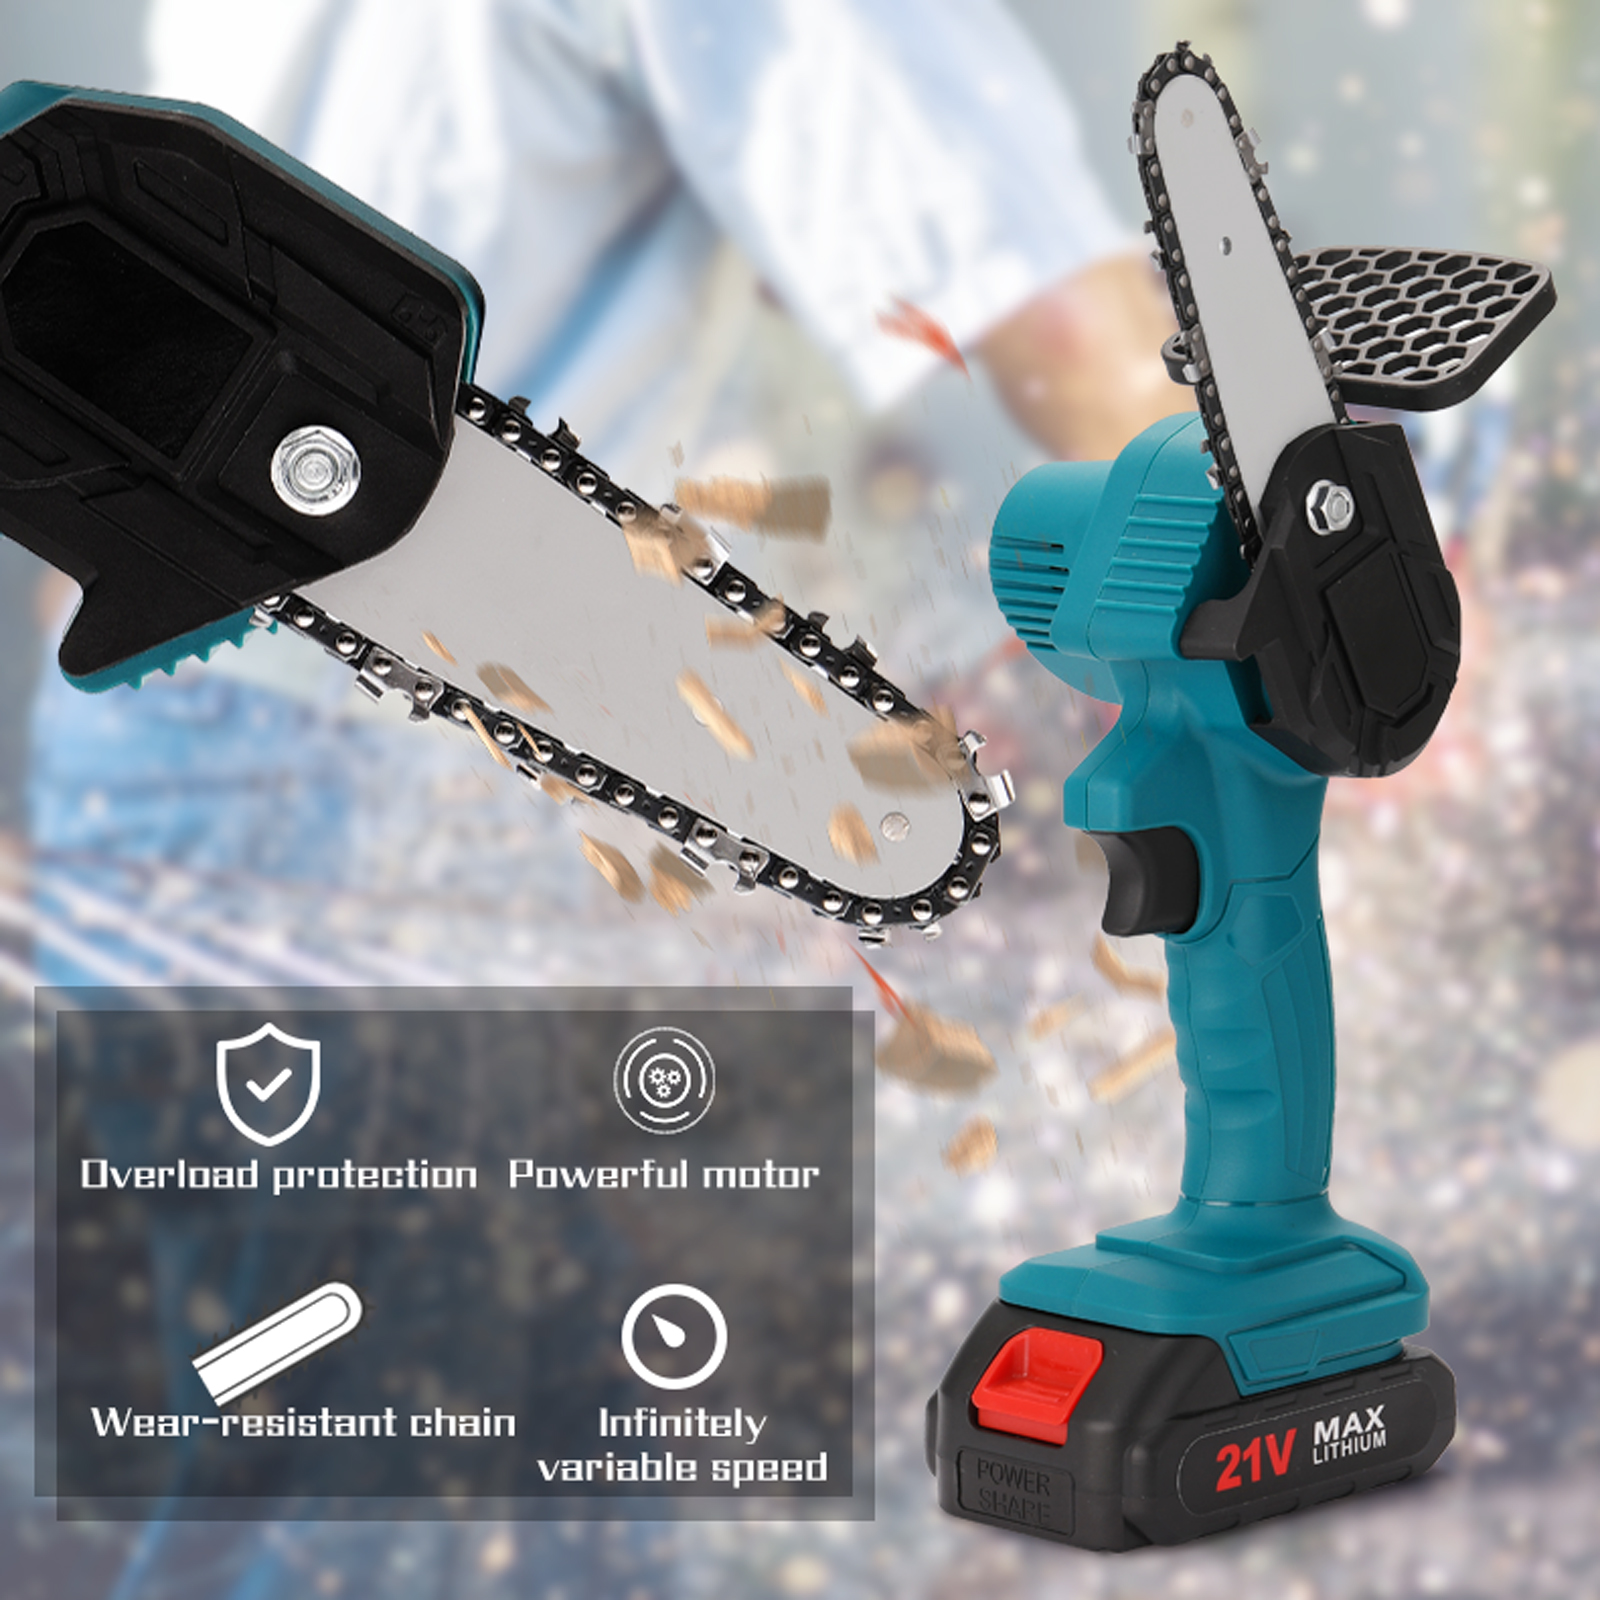 Portable Electric Pruning Saw Rechargeable Small Electric Saws Woodworking One-handed Electric Saw Garden Logging Mini Brushed Electric Chain Saw - image 2 of 6